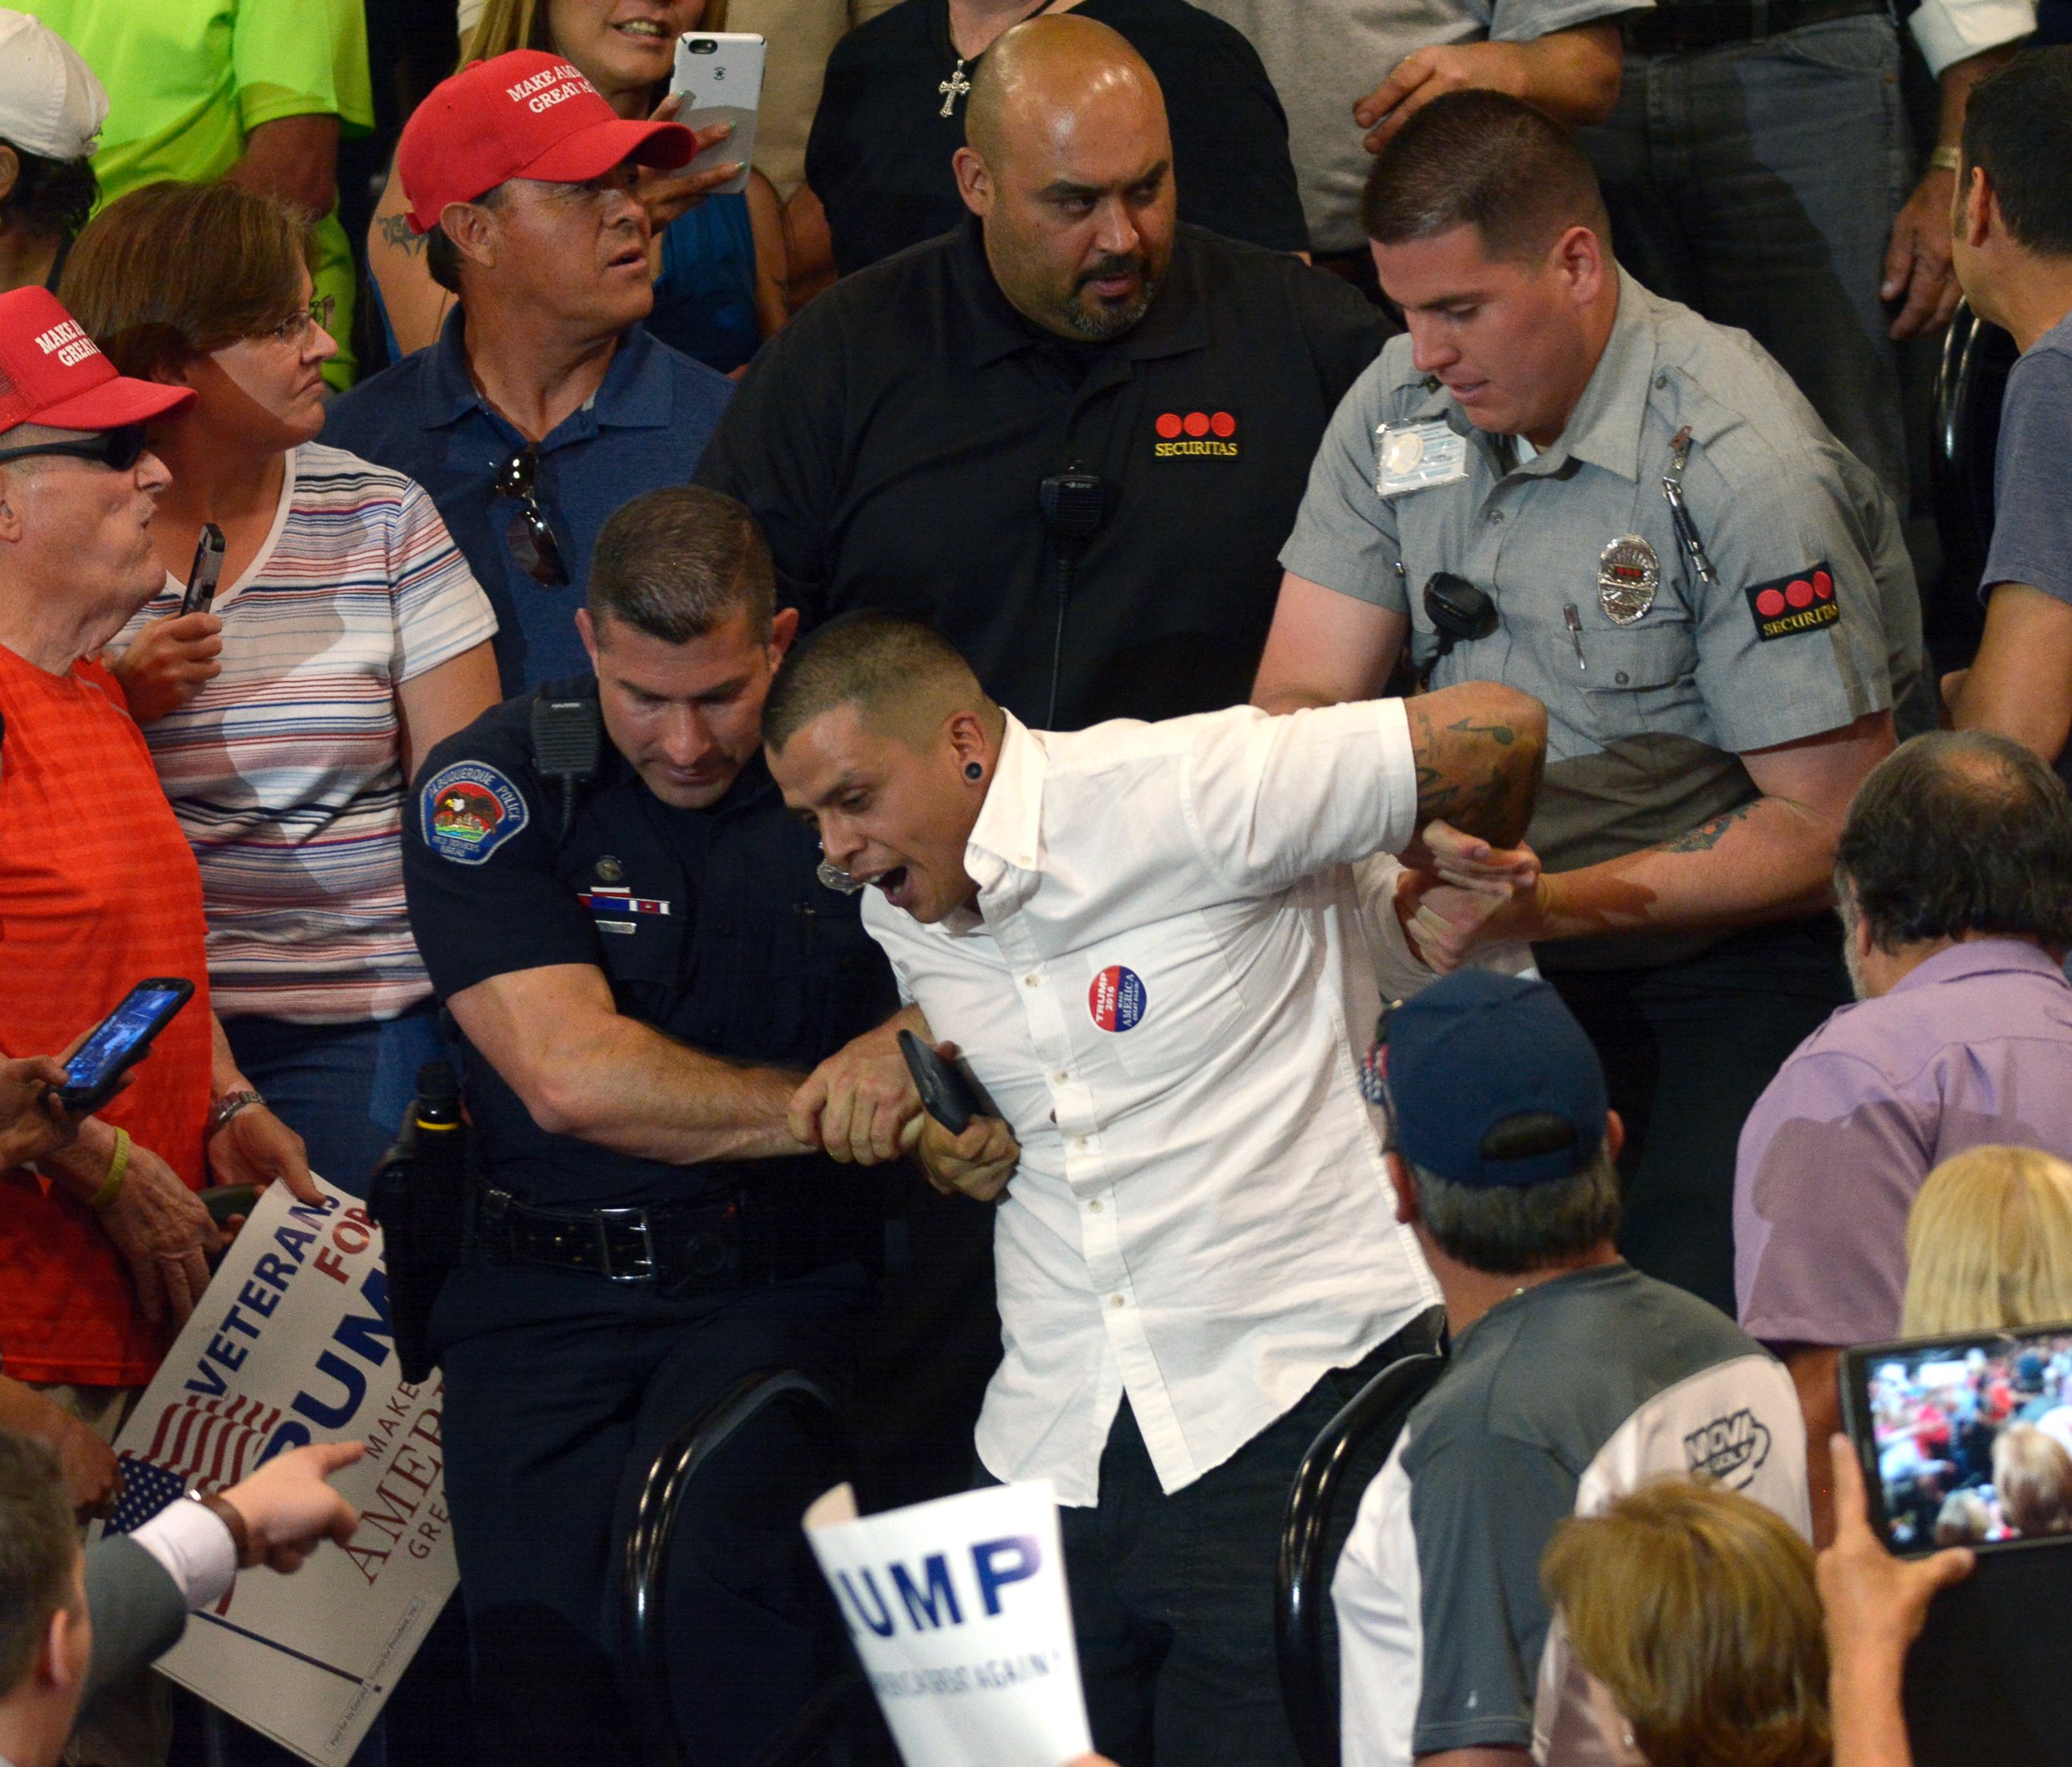 PHOTO: A protester is escorted out of the Albuquerque Convention Center during a rally for Republican presidential candidate Donald Trump, May 24, 2016, in Albuquerque.